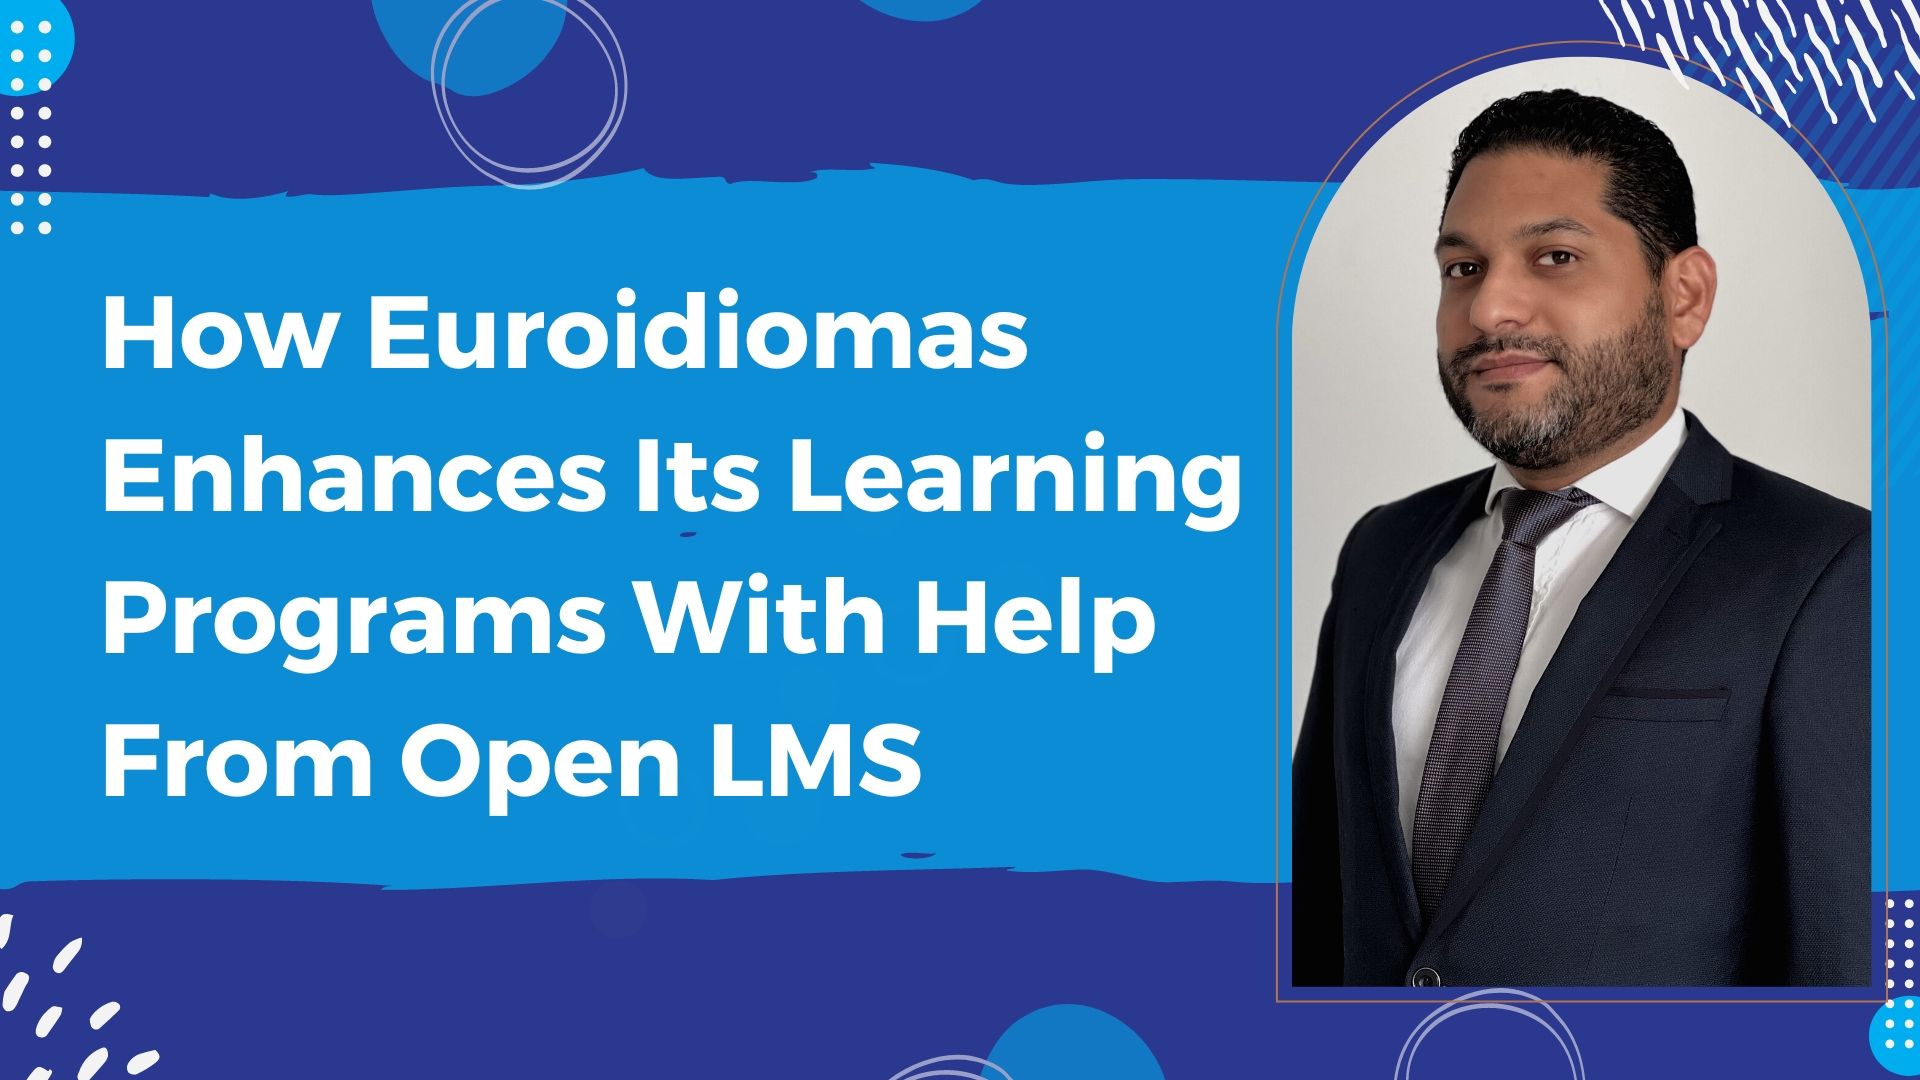 How Euroidiomas Enhances Its Learning Programs With Help From Open LMS